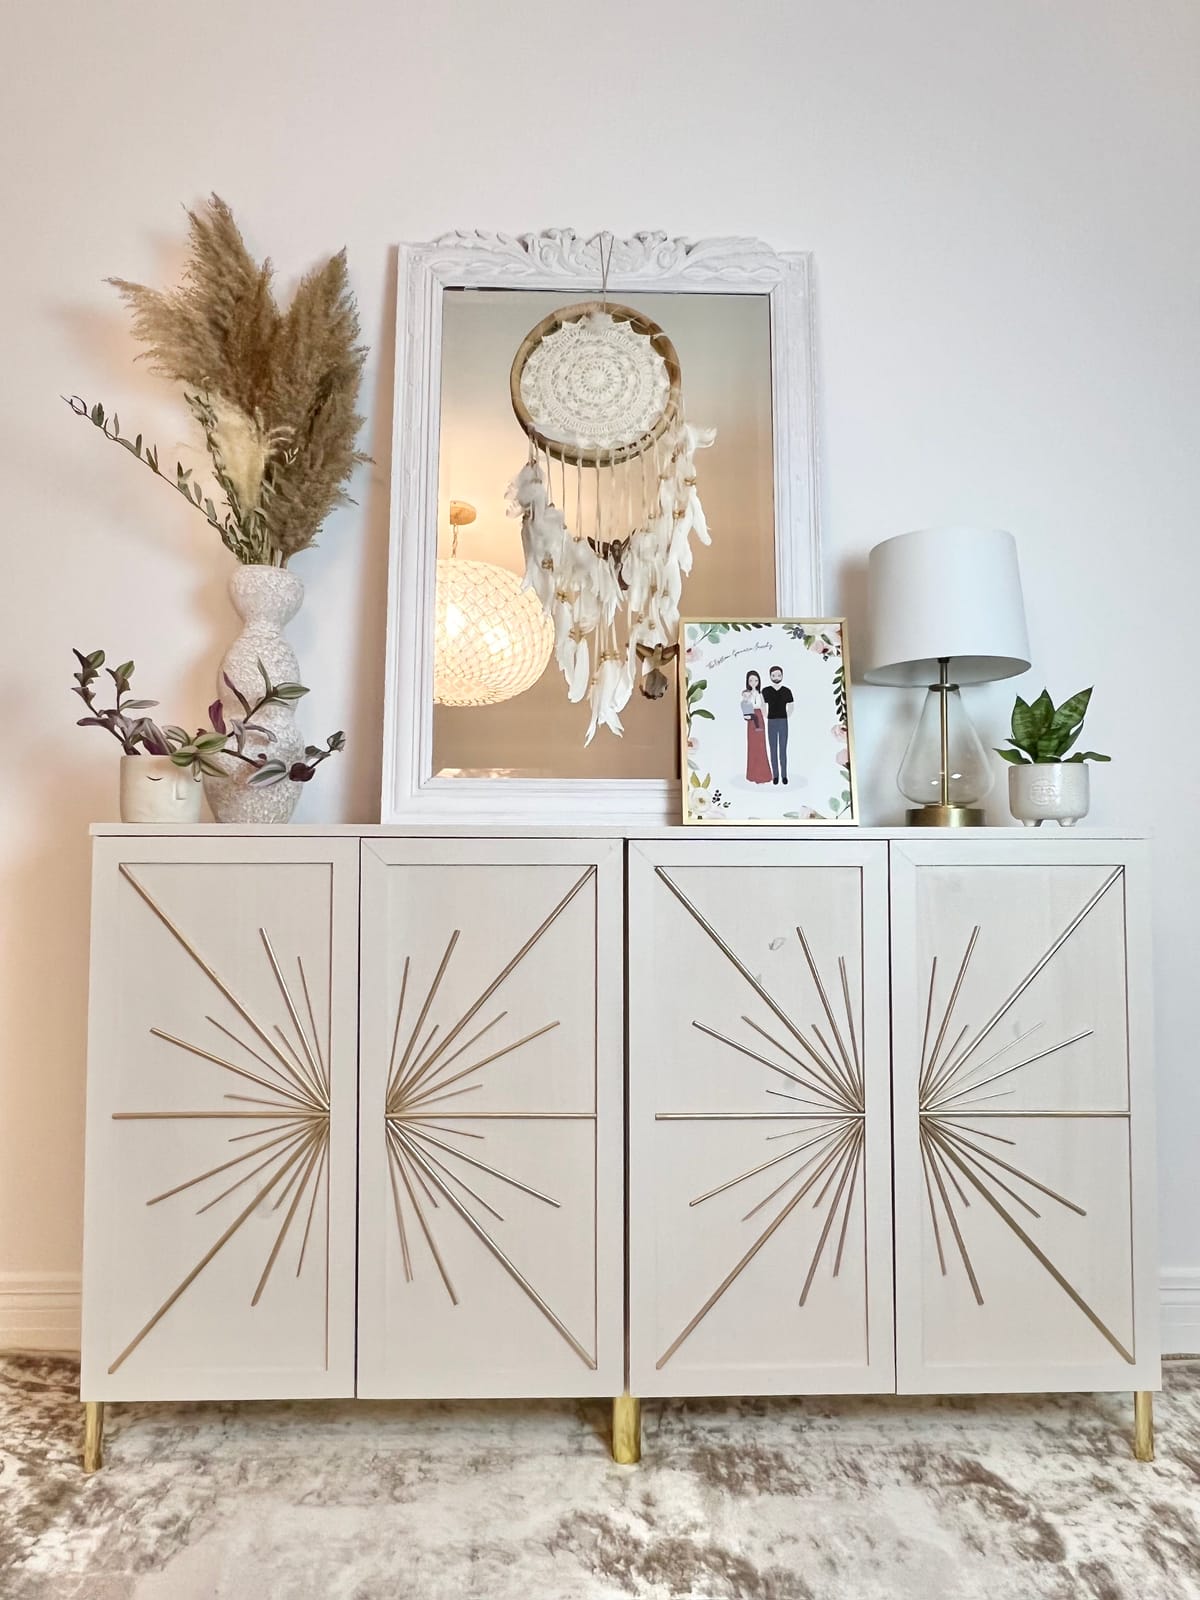 Elevate Your Cabinets with a Stunning Starburst Design - An Ikea Hack